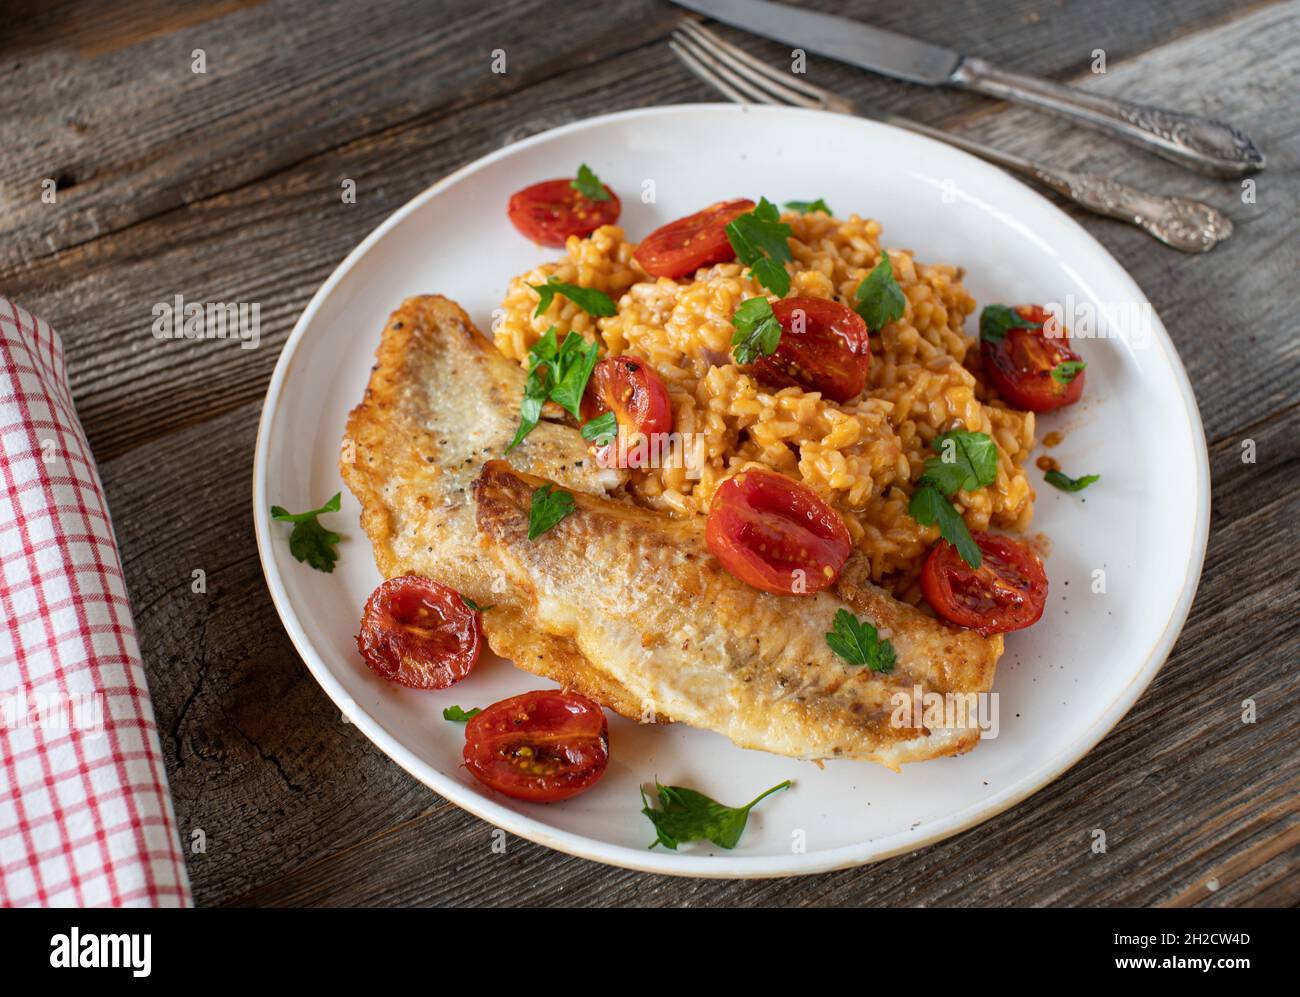 Sauteed fish with rice and vegetable on a plate on rustic and wooden table Stock Photo